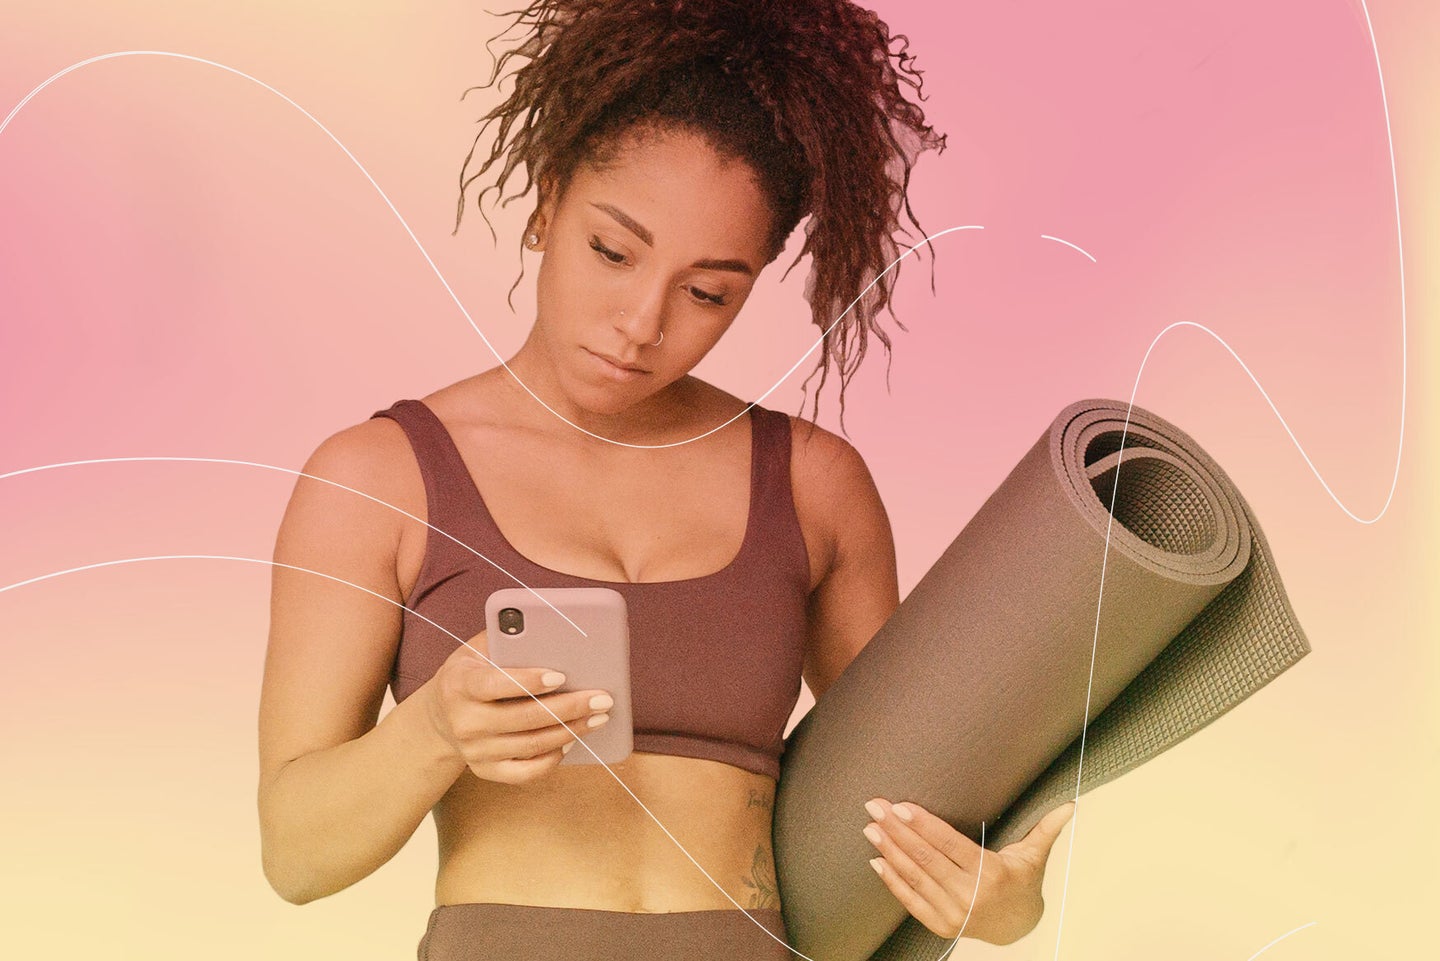 a woman with tan skin and curly hair wearing workout clothes and holding a yoga mat looks down at her phone